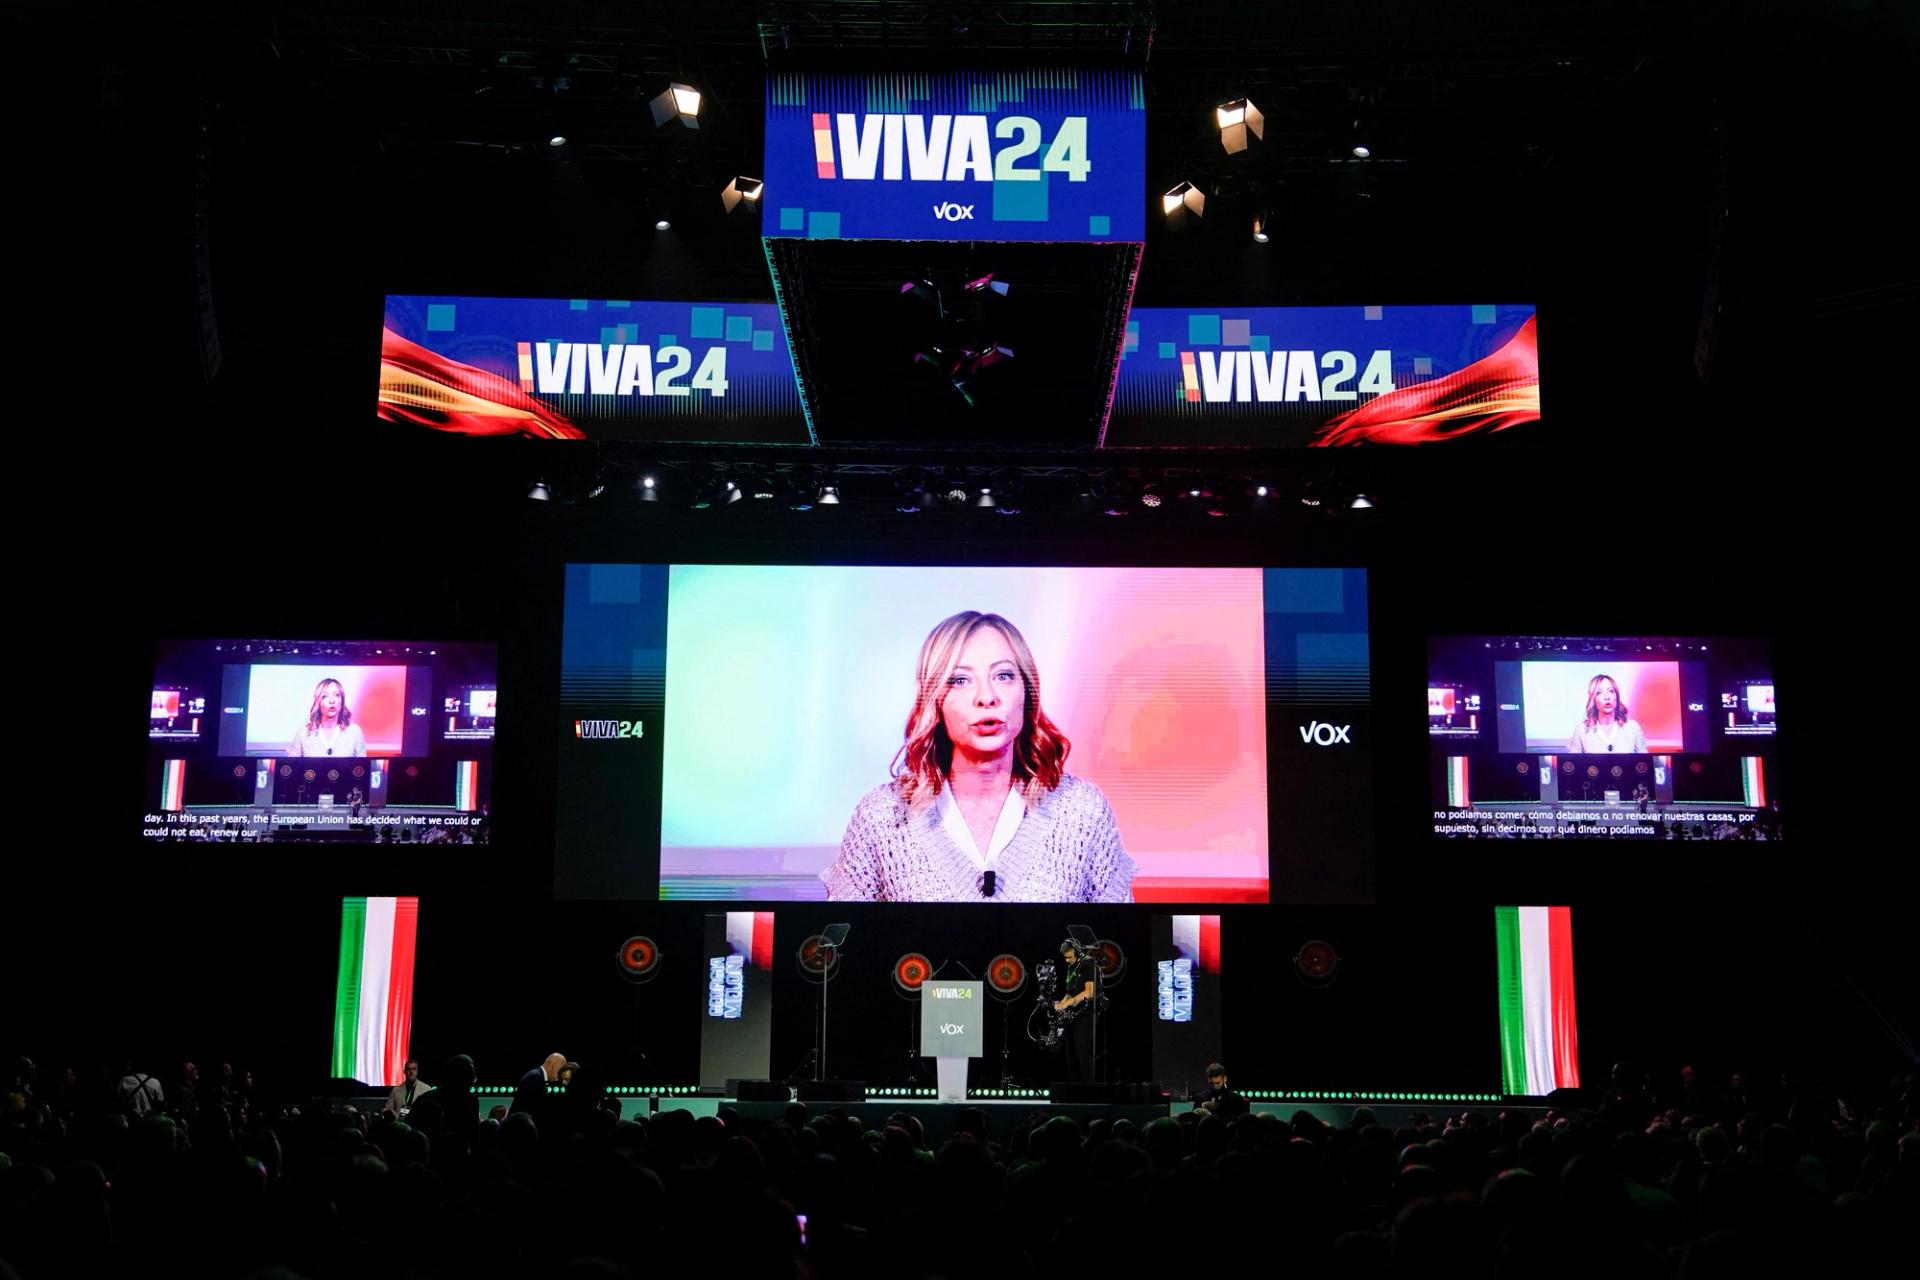 Italian Prime Minister Giorgia Meloni speaks via video link during a rally organised by the Spanish far-right Vox party ahead of the European elections, with various far-right leaders including Argentina's president Javier Milei, in Madrid, Spain, May 19, 2024.